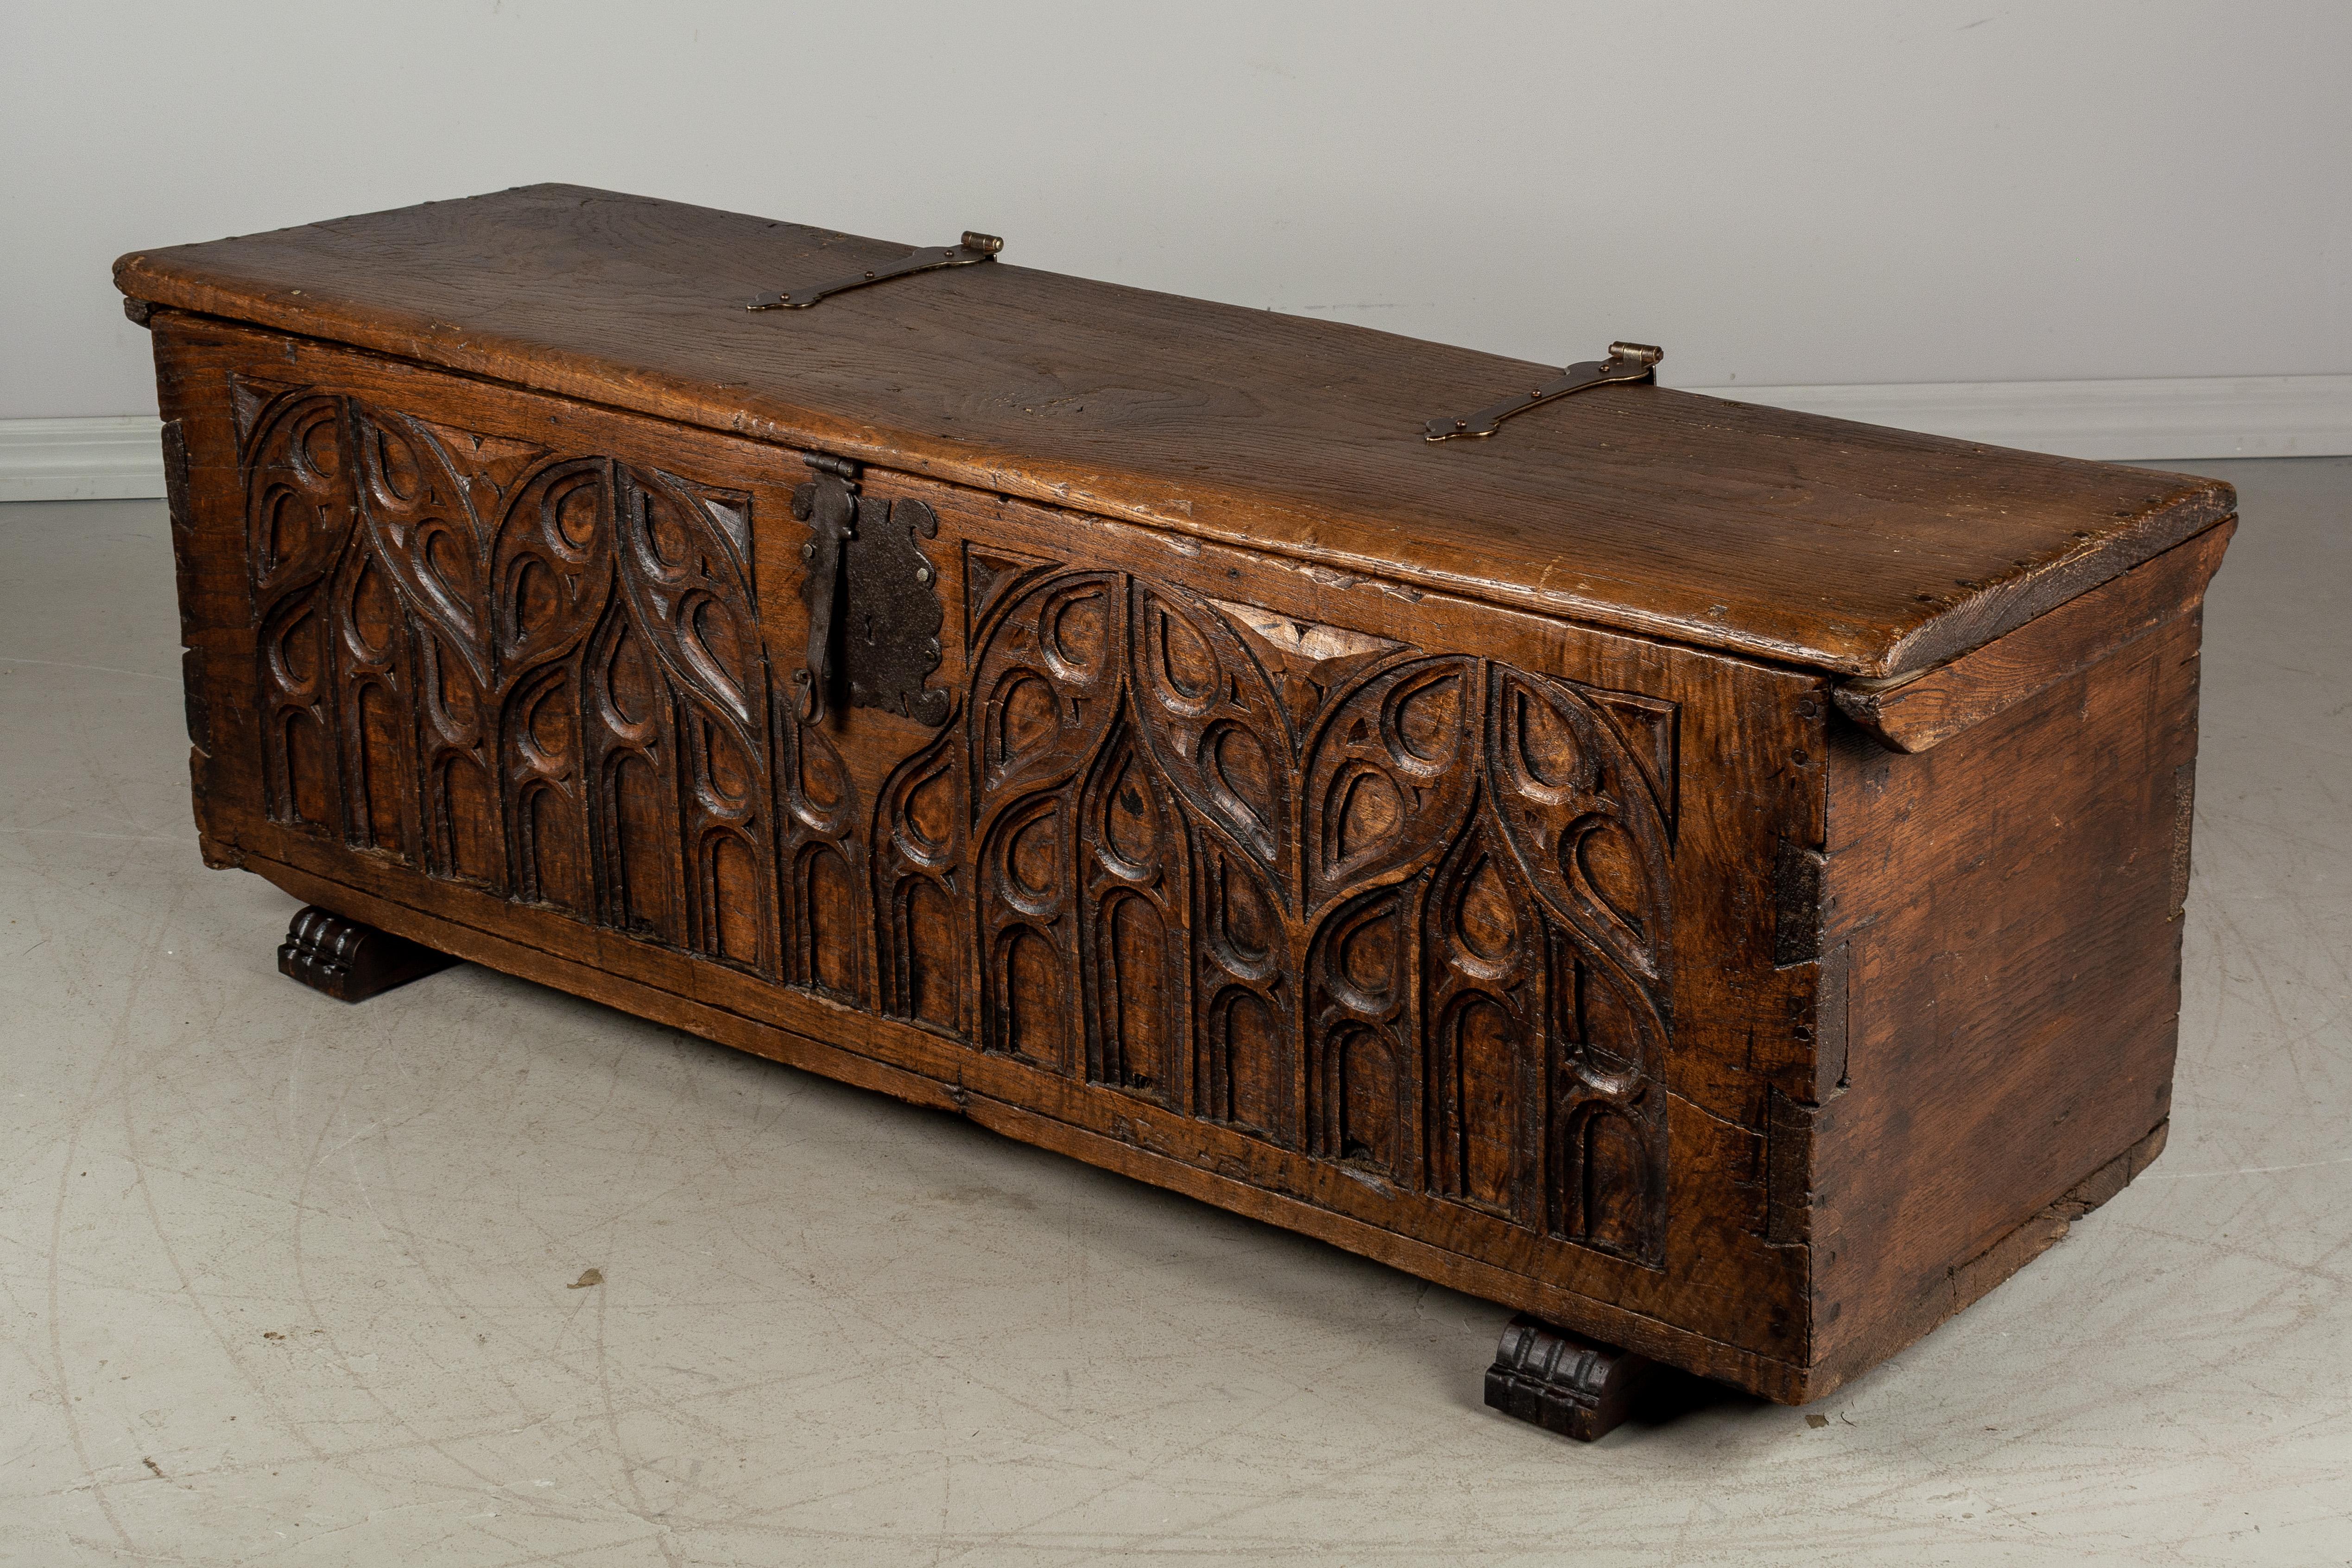 An early 18th French Gothic style blanket chest or bench made of solid chestnut with hand carved architectural relief across the front. Thick wood planks are joined using miter and dovetailed construction. Wood has beautiful character with waxed